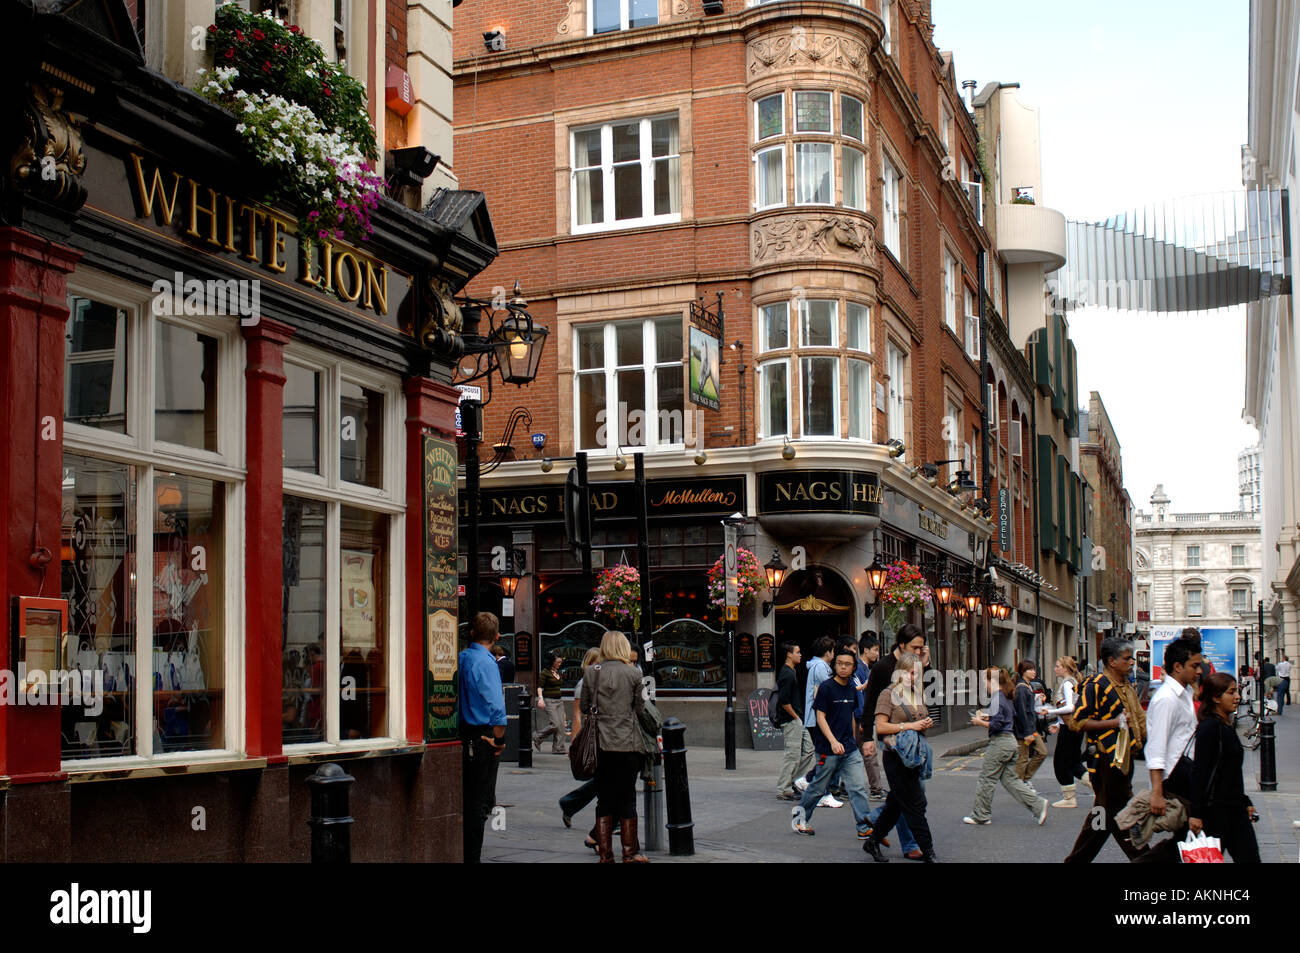 Floral Street London High Resolution Stock Photography and Images - Alamy